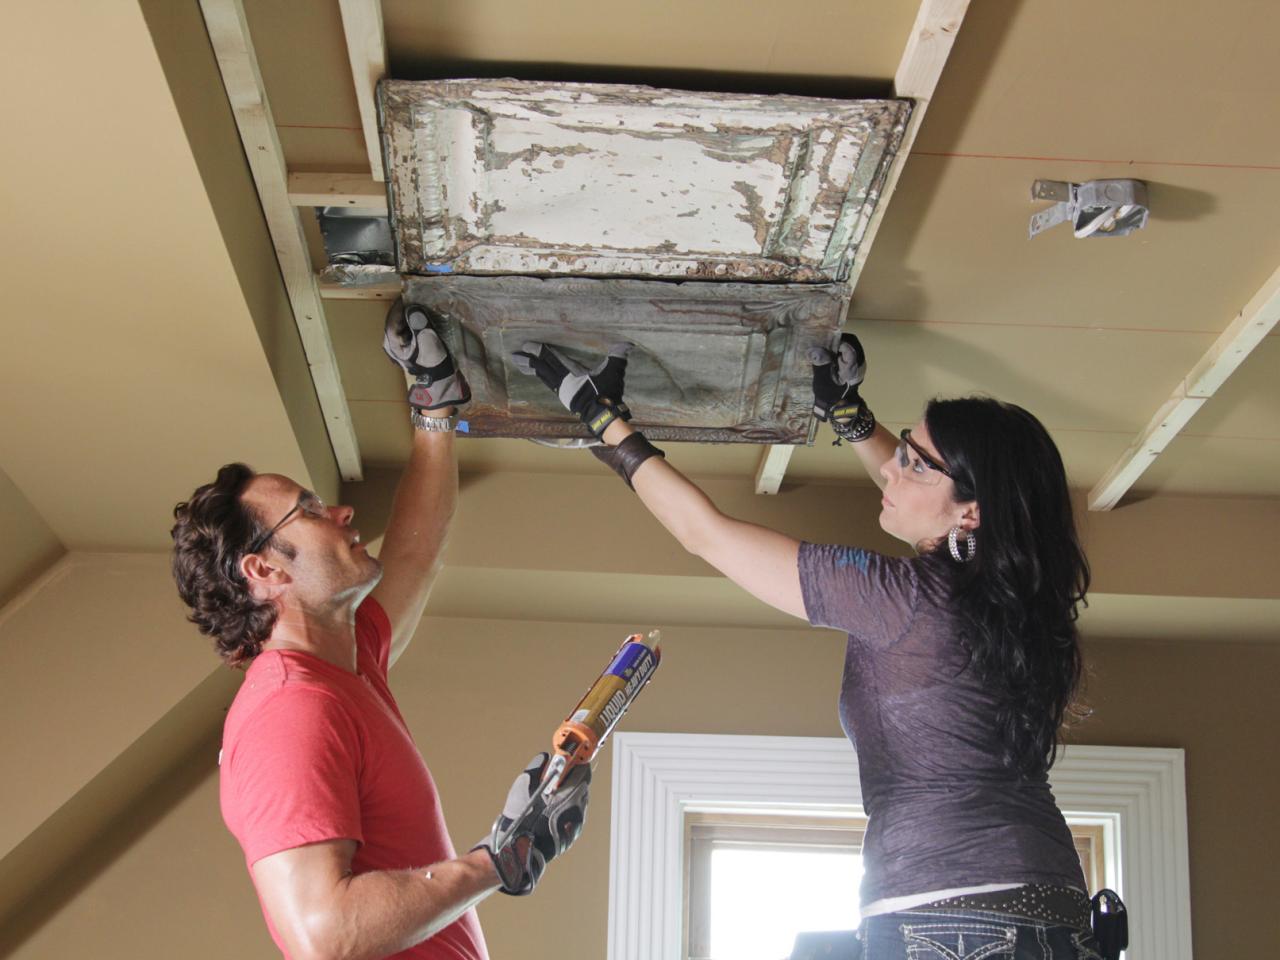 How To Install A Stamped Tin Ceiling, Cost Of Tin Ceiling Tile Installation